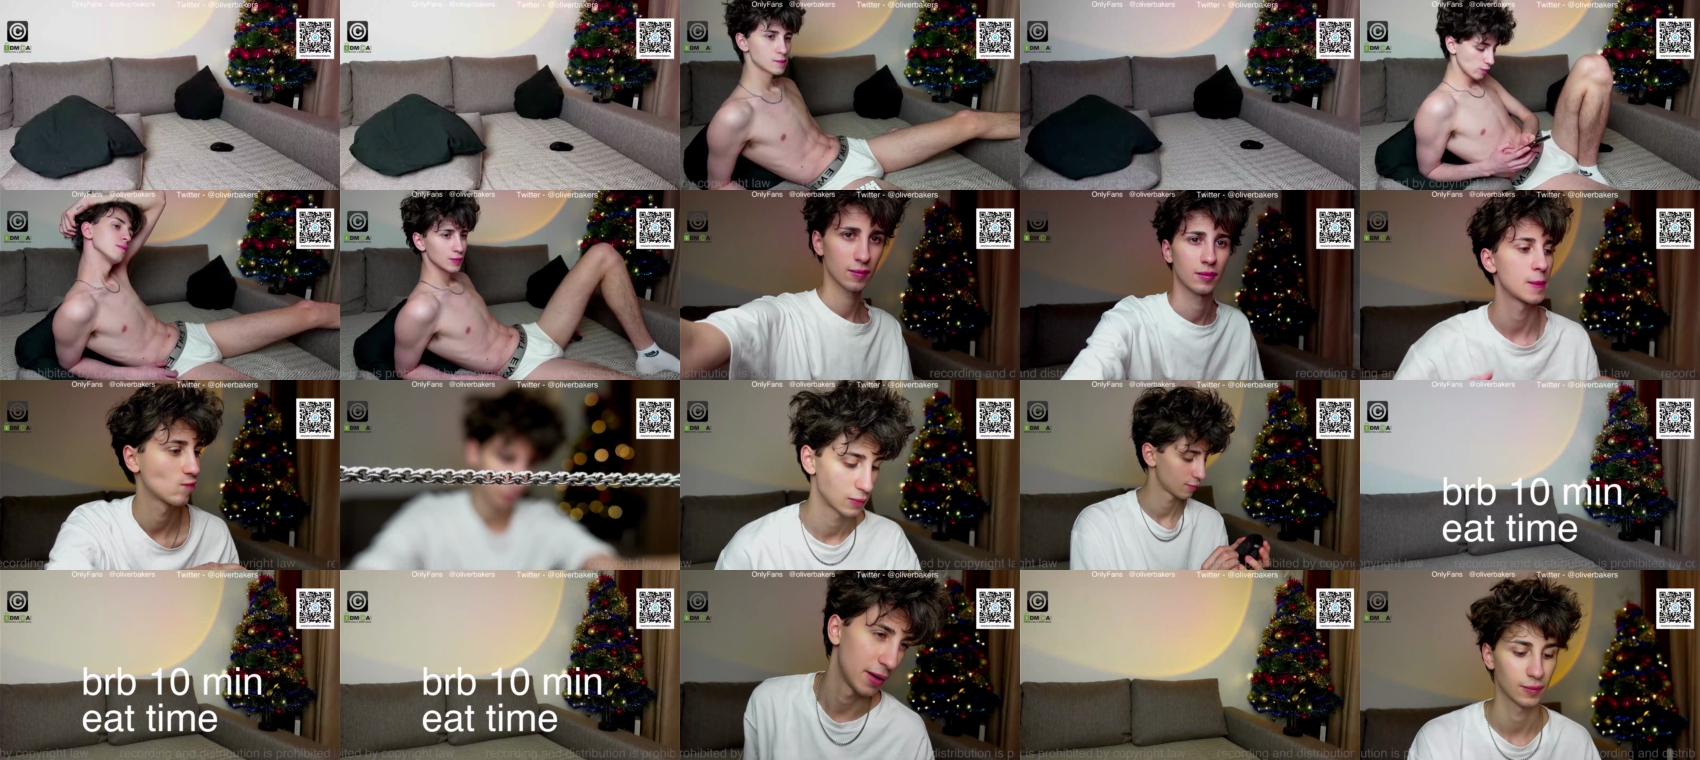 oliver_baker playtime CAM SHOW @ Chaturbate 17-01-2022